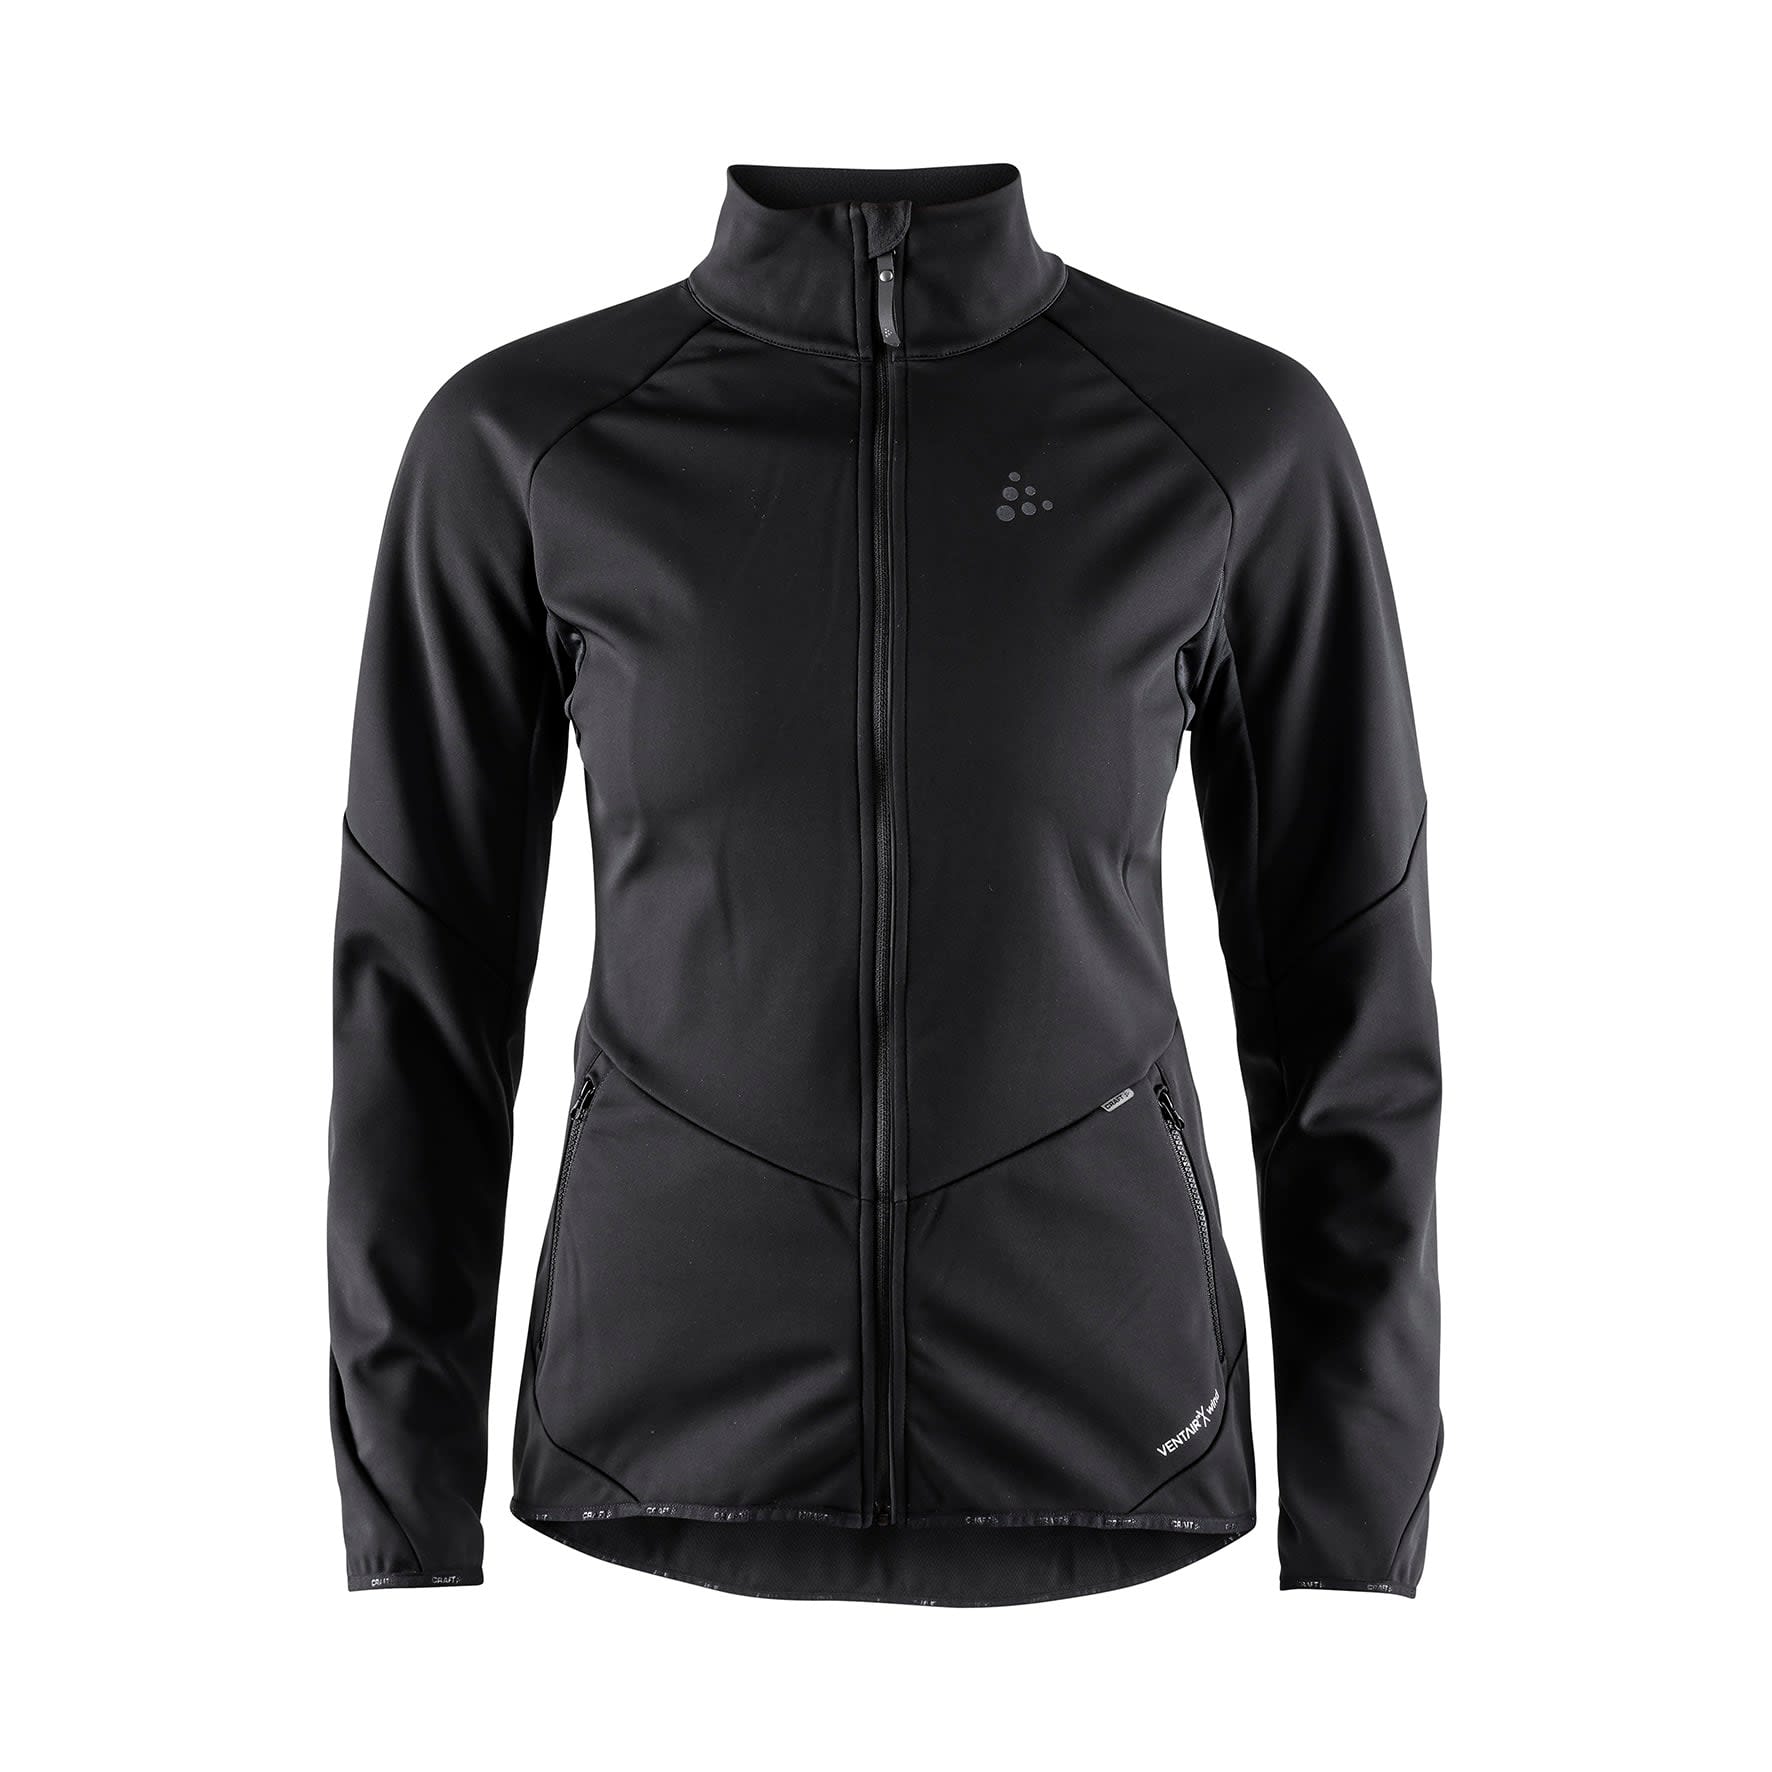 Buy Craft Women's Glide Jacket from Outnorth